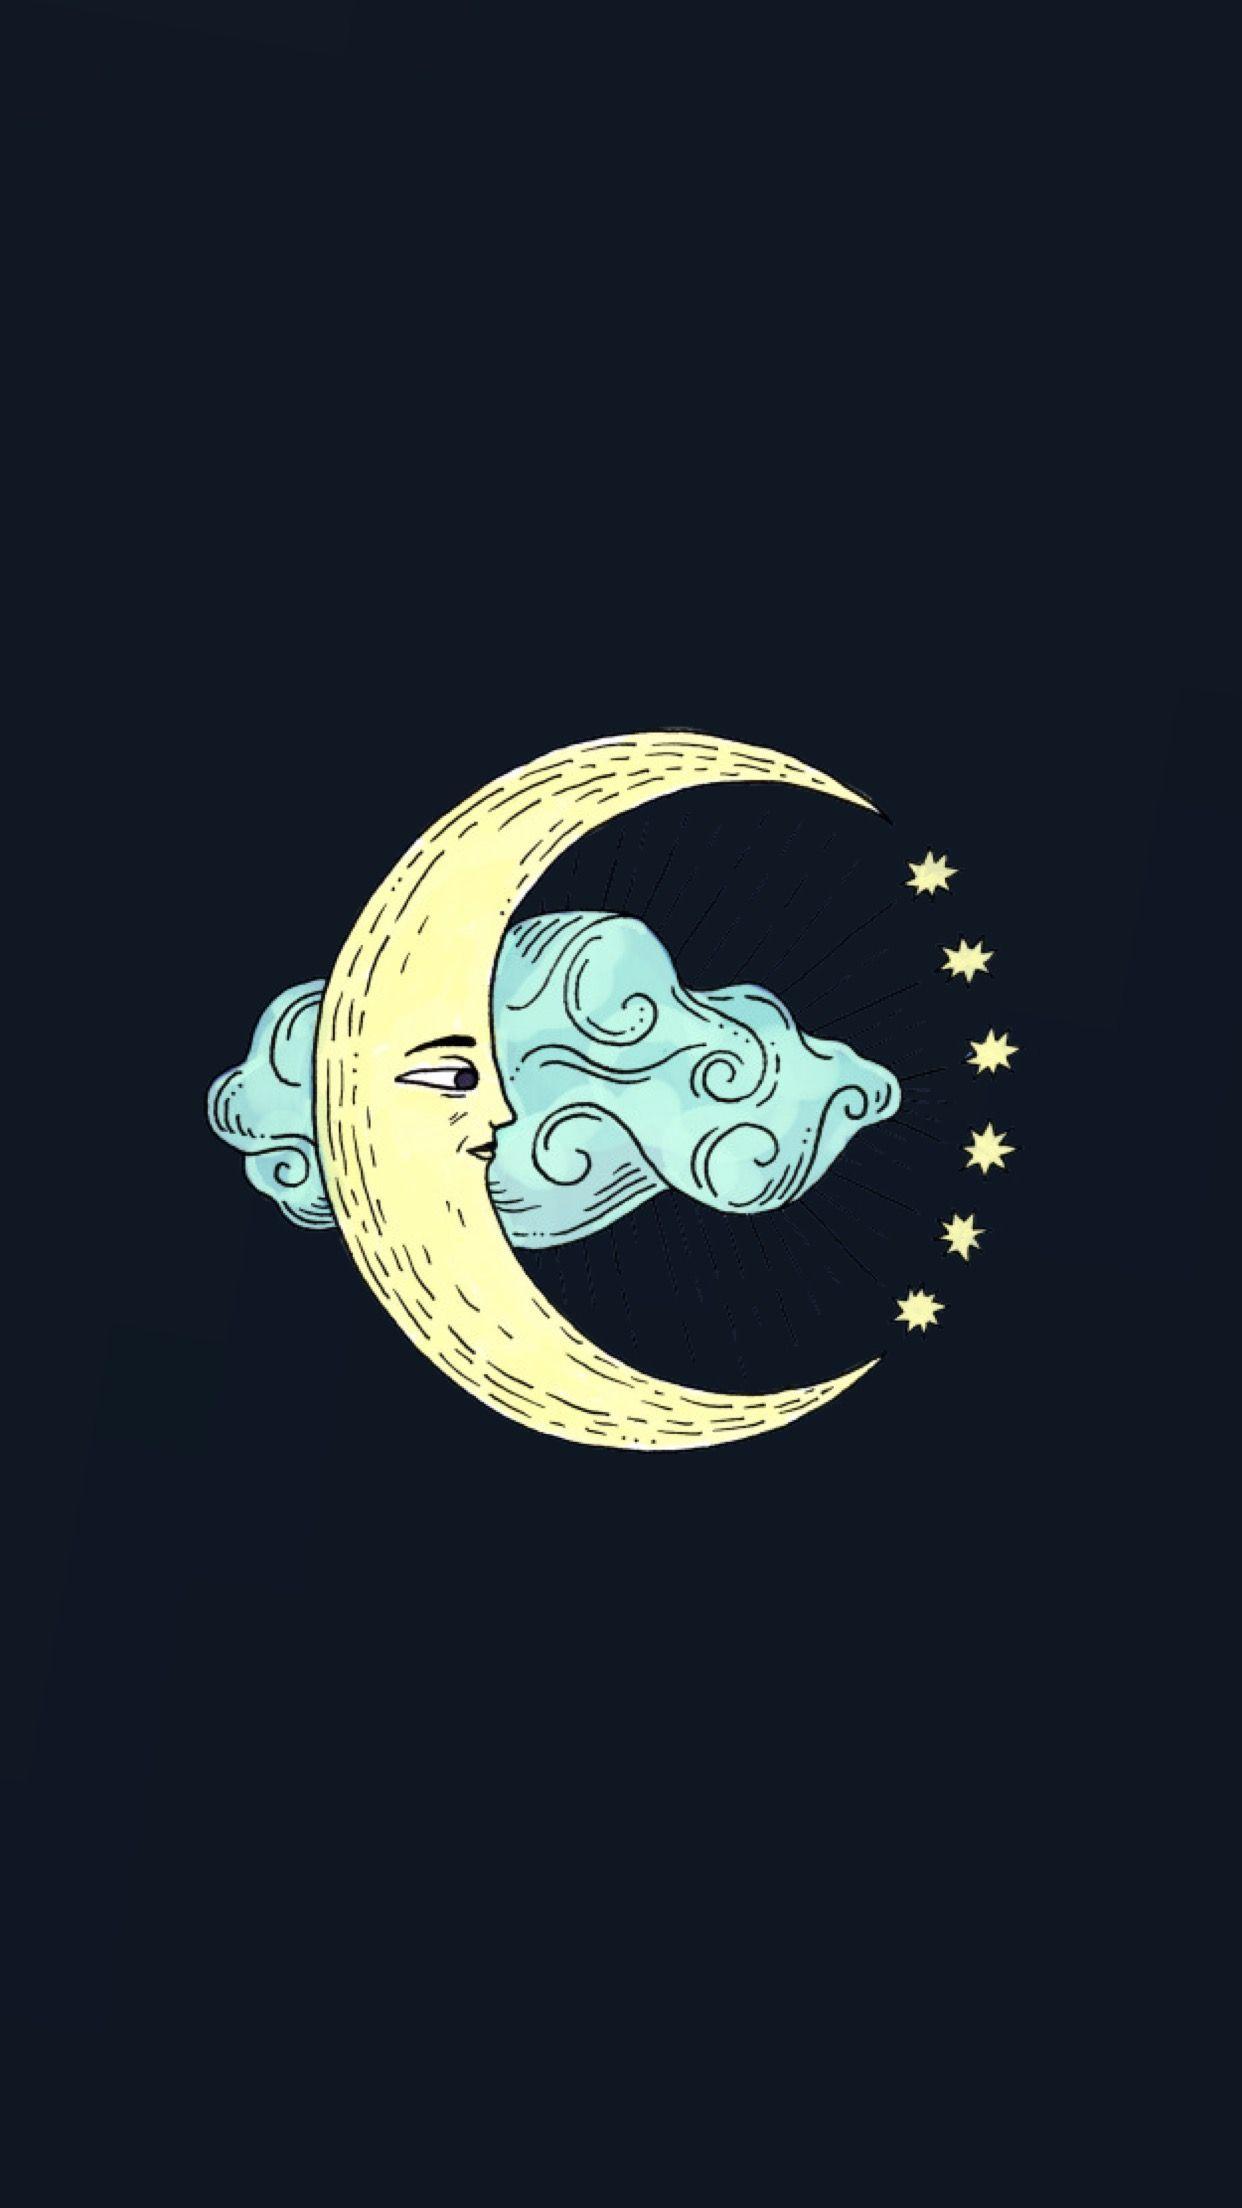 Moon in the clouds wallpaper. made by Laurette. instagram:. Hipster wallpaper, iPhone wallpaper, Cloud wallpaper